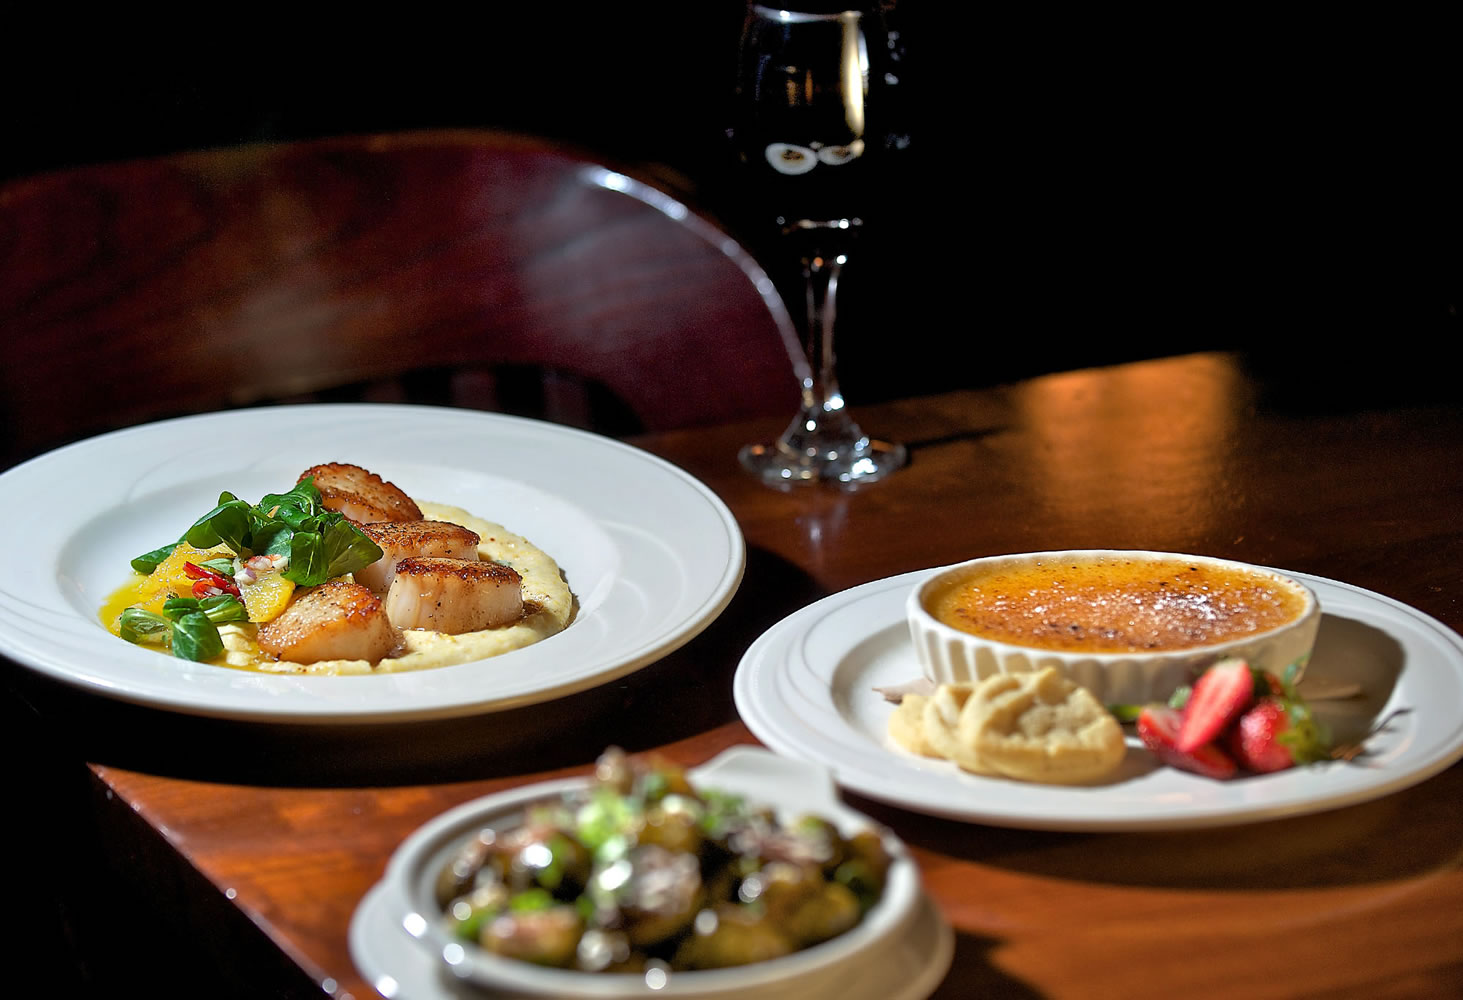 The Pan Seared Scallops are served on polenta, the Roasted Brussels Sprouts are maybe a tad overdone, and the Creme Brulee is scrumptious at Hudson's Bar &amp; Grill, inside the Heathman Lodge.